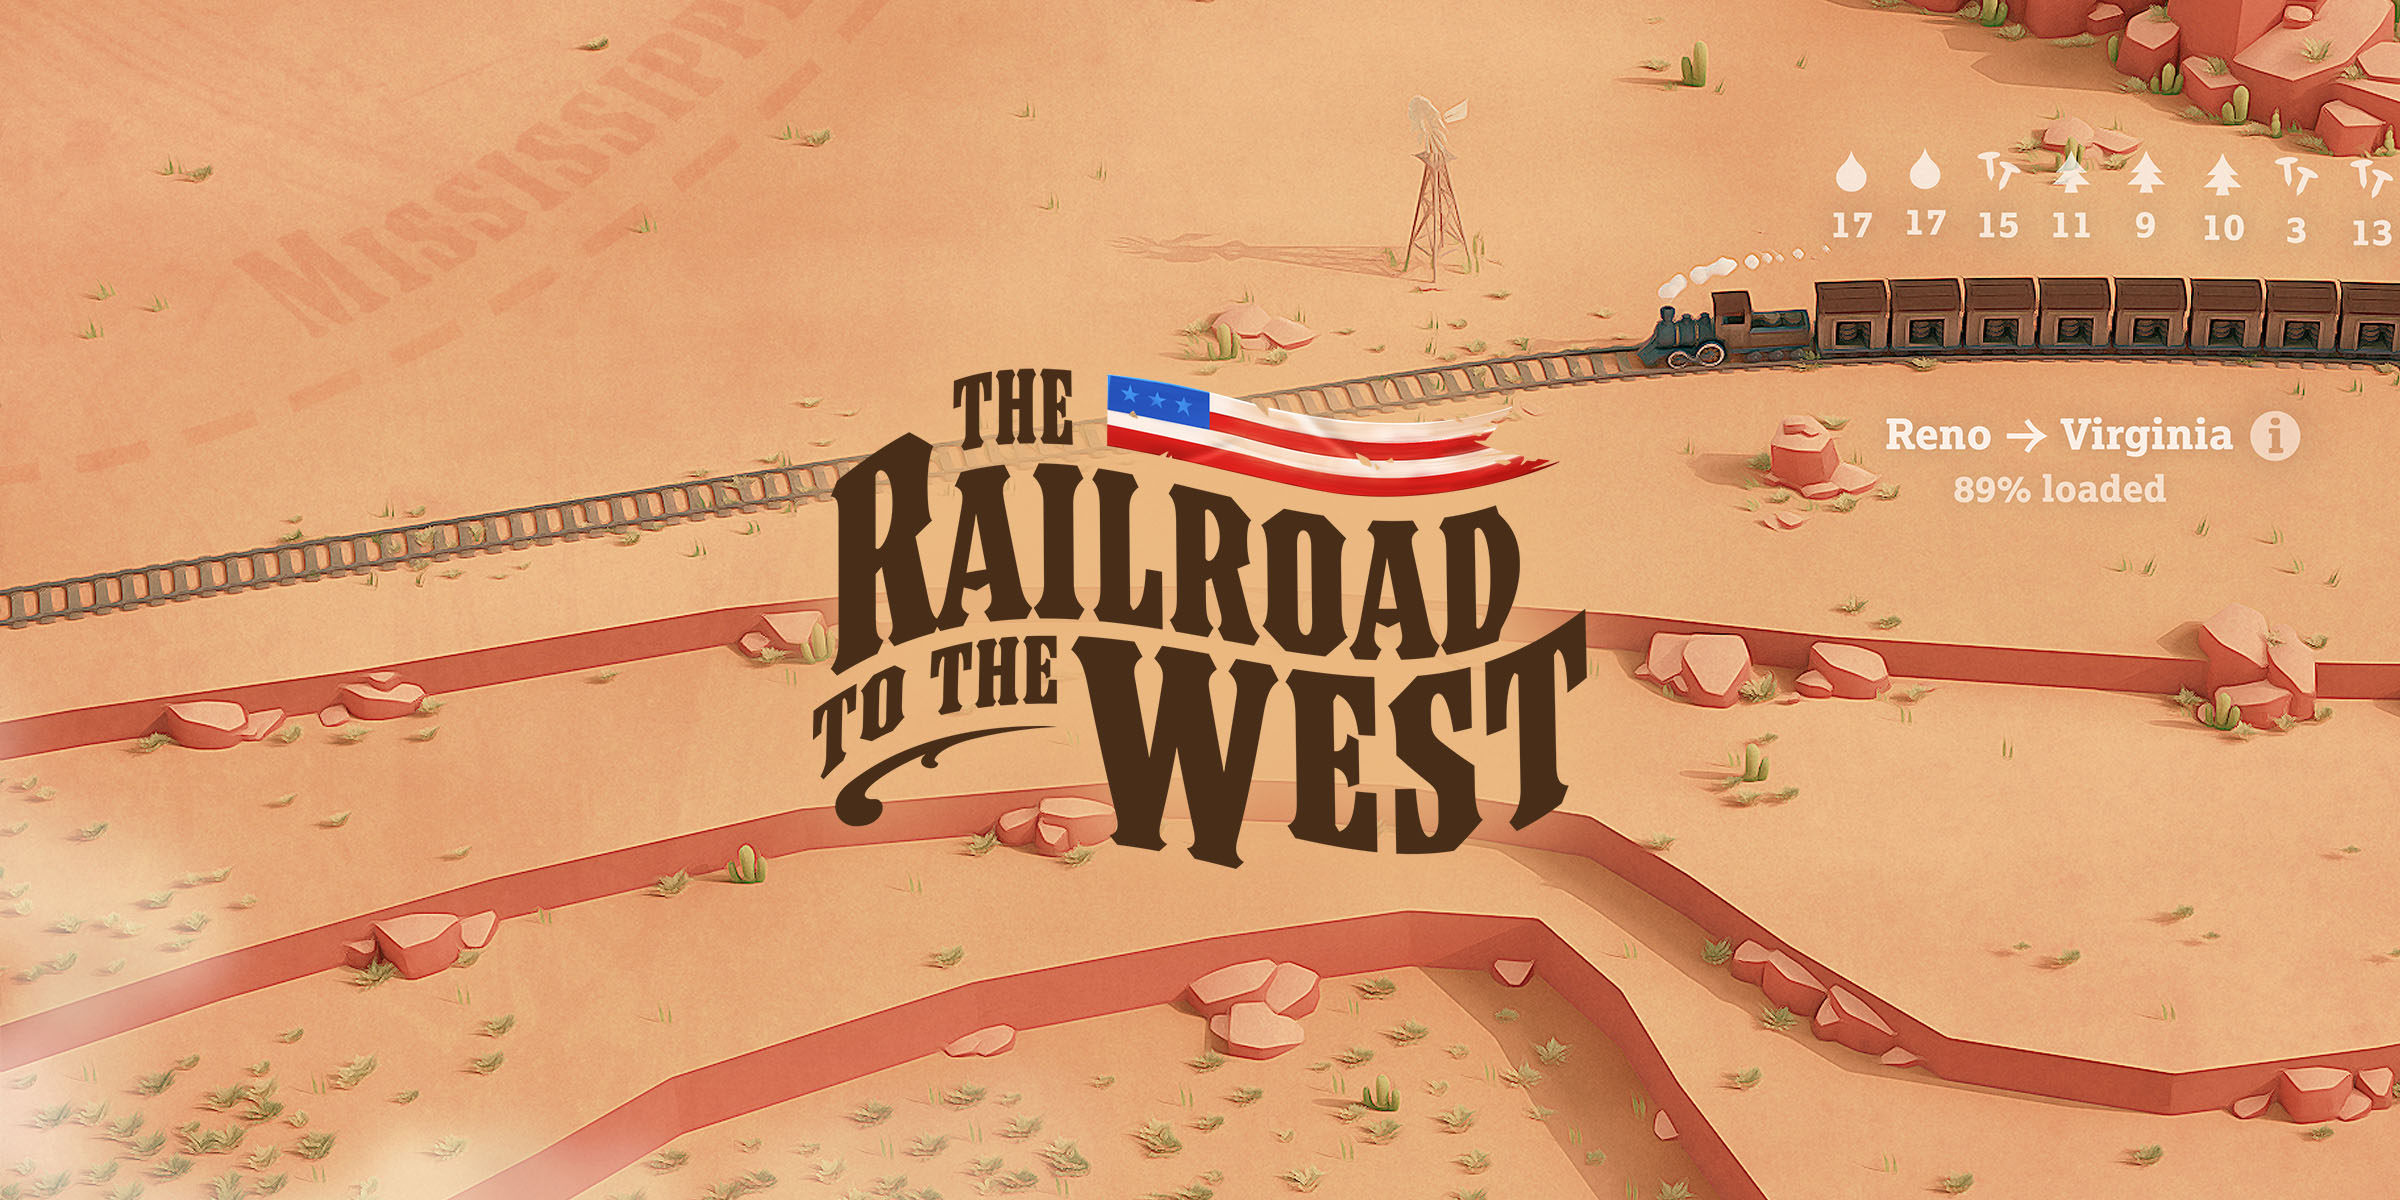 The Railroad to the West